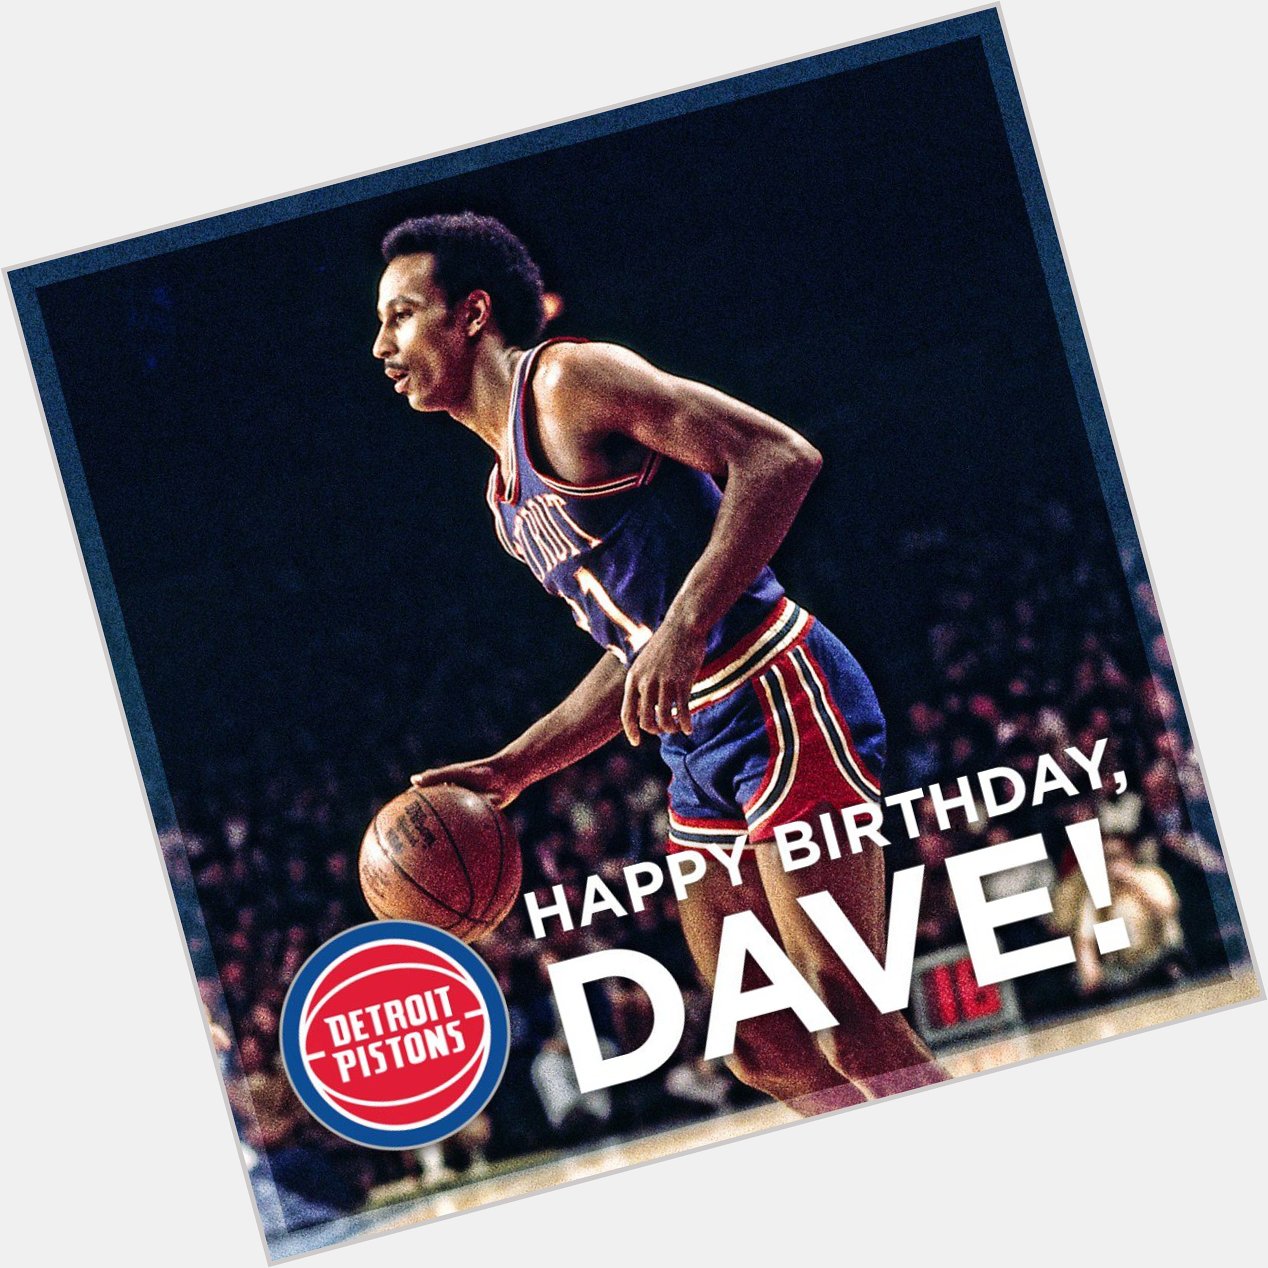 Join us in wishing Dave Bing a very Happy Birthday!  